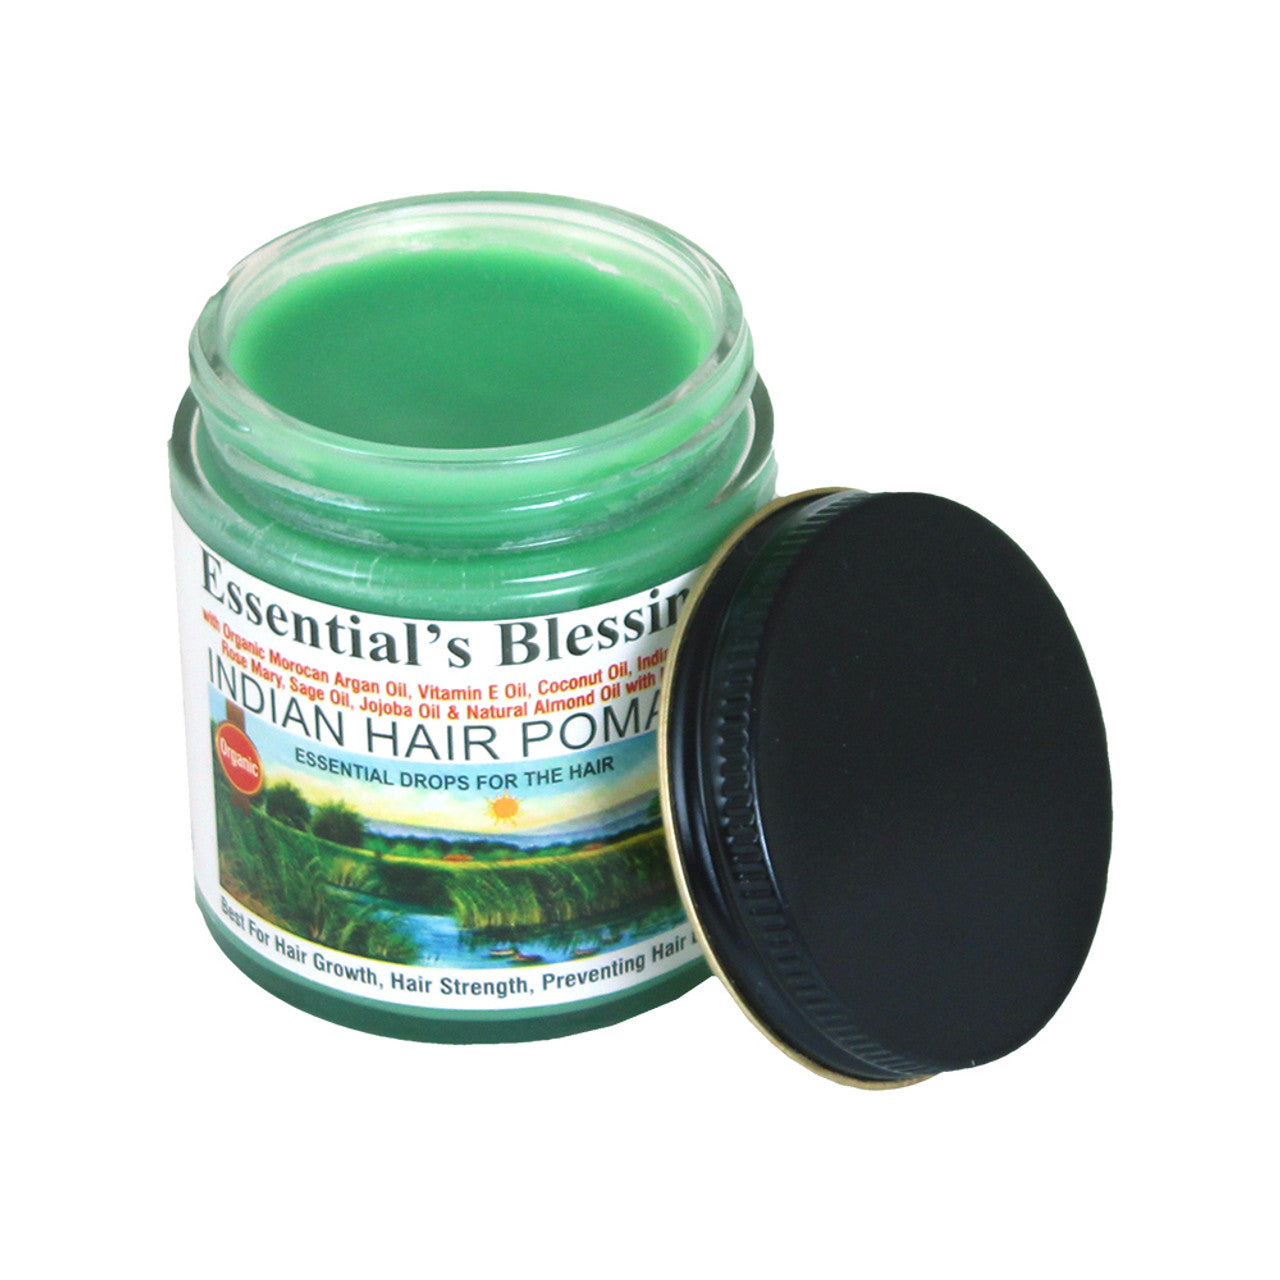 Essential's Blessing Indian Hair Pomade